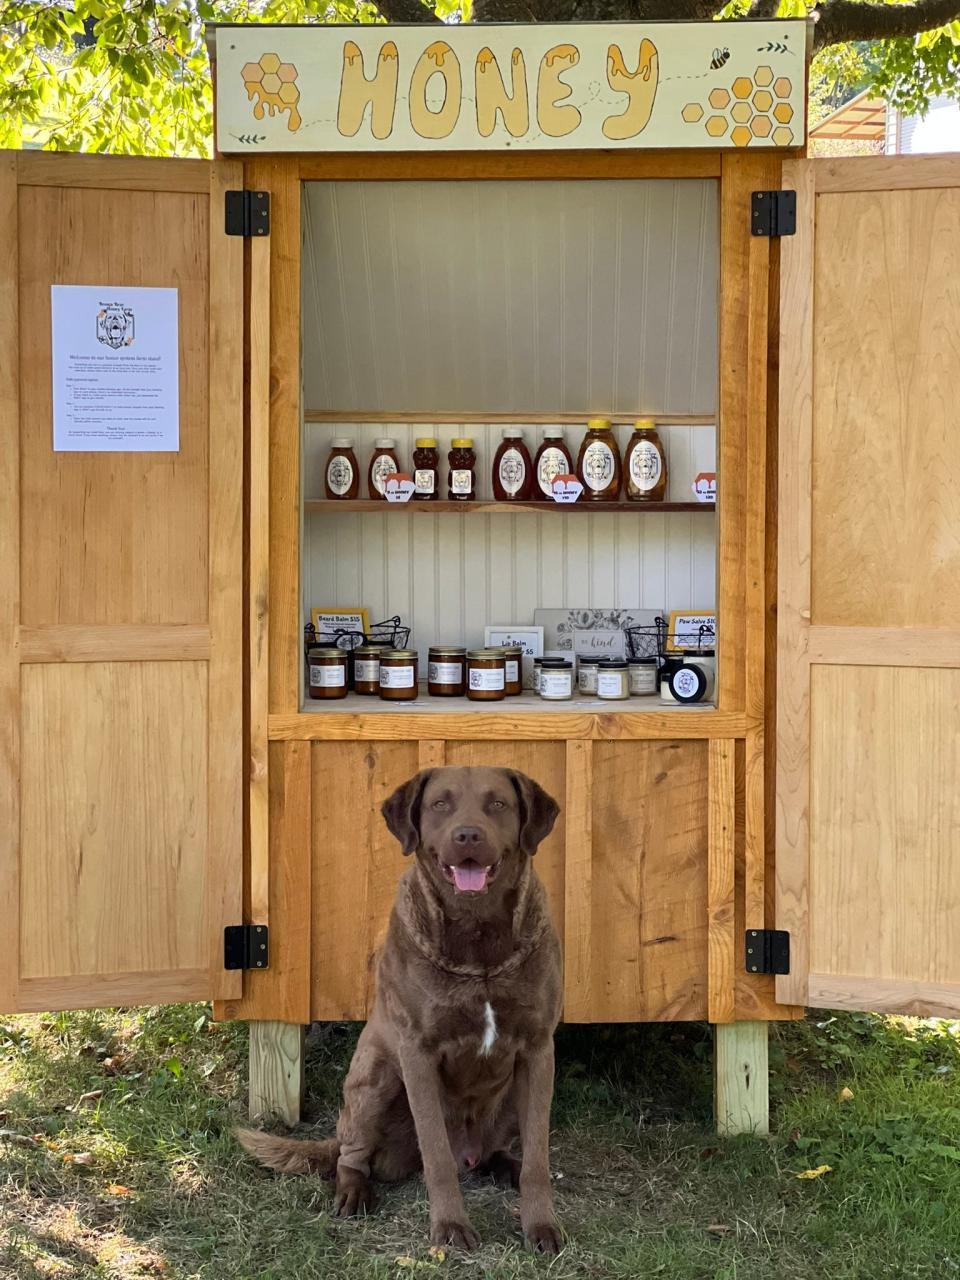 Koda Bear Edwards in front of his owners' honey jars display, which includes his picture on the labels.